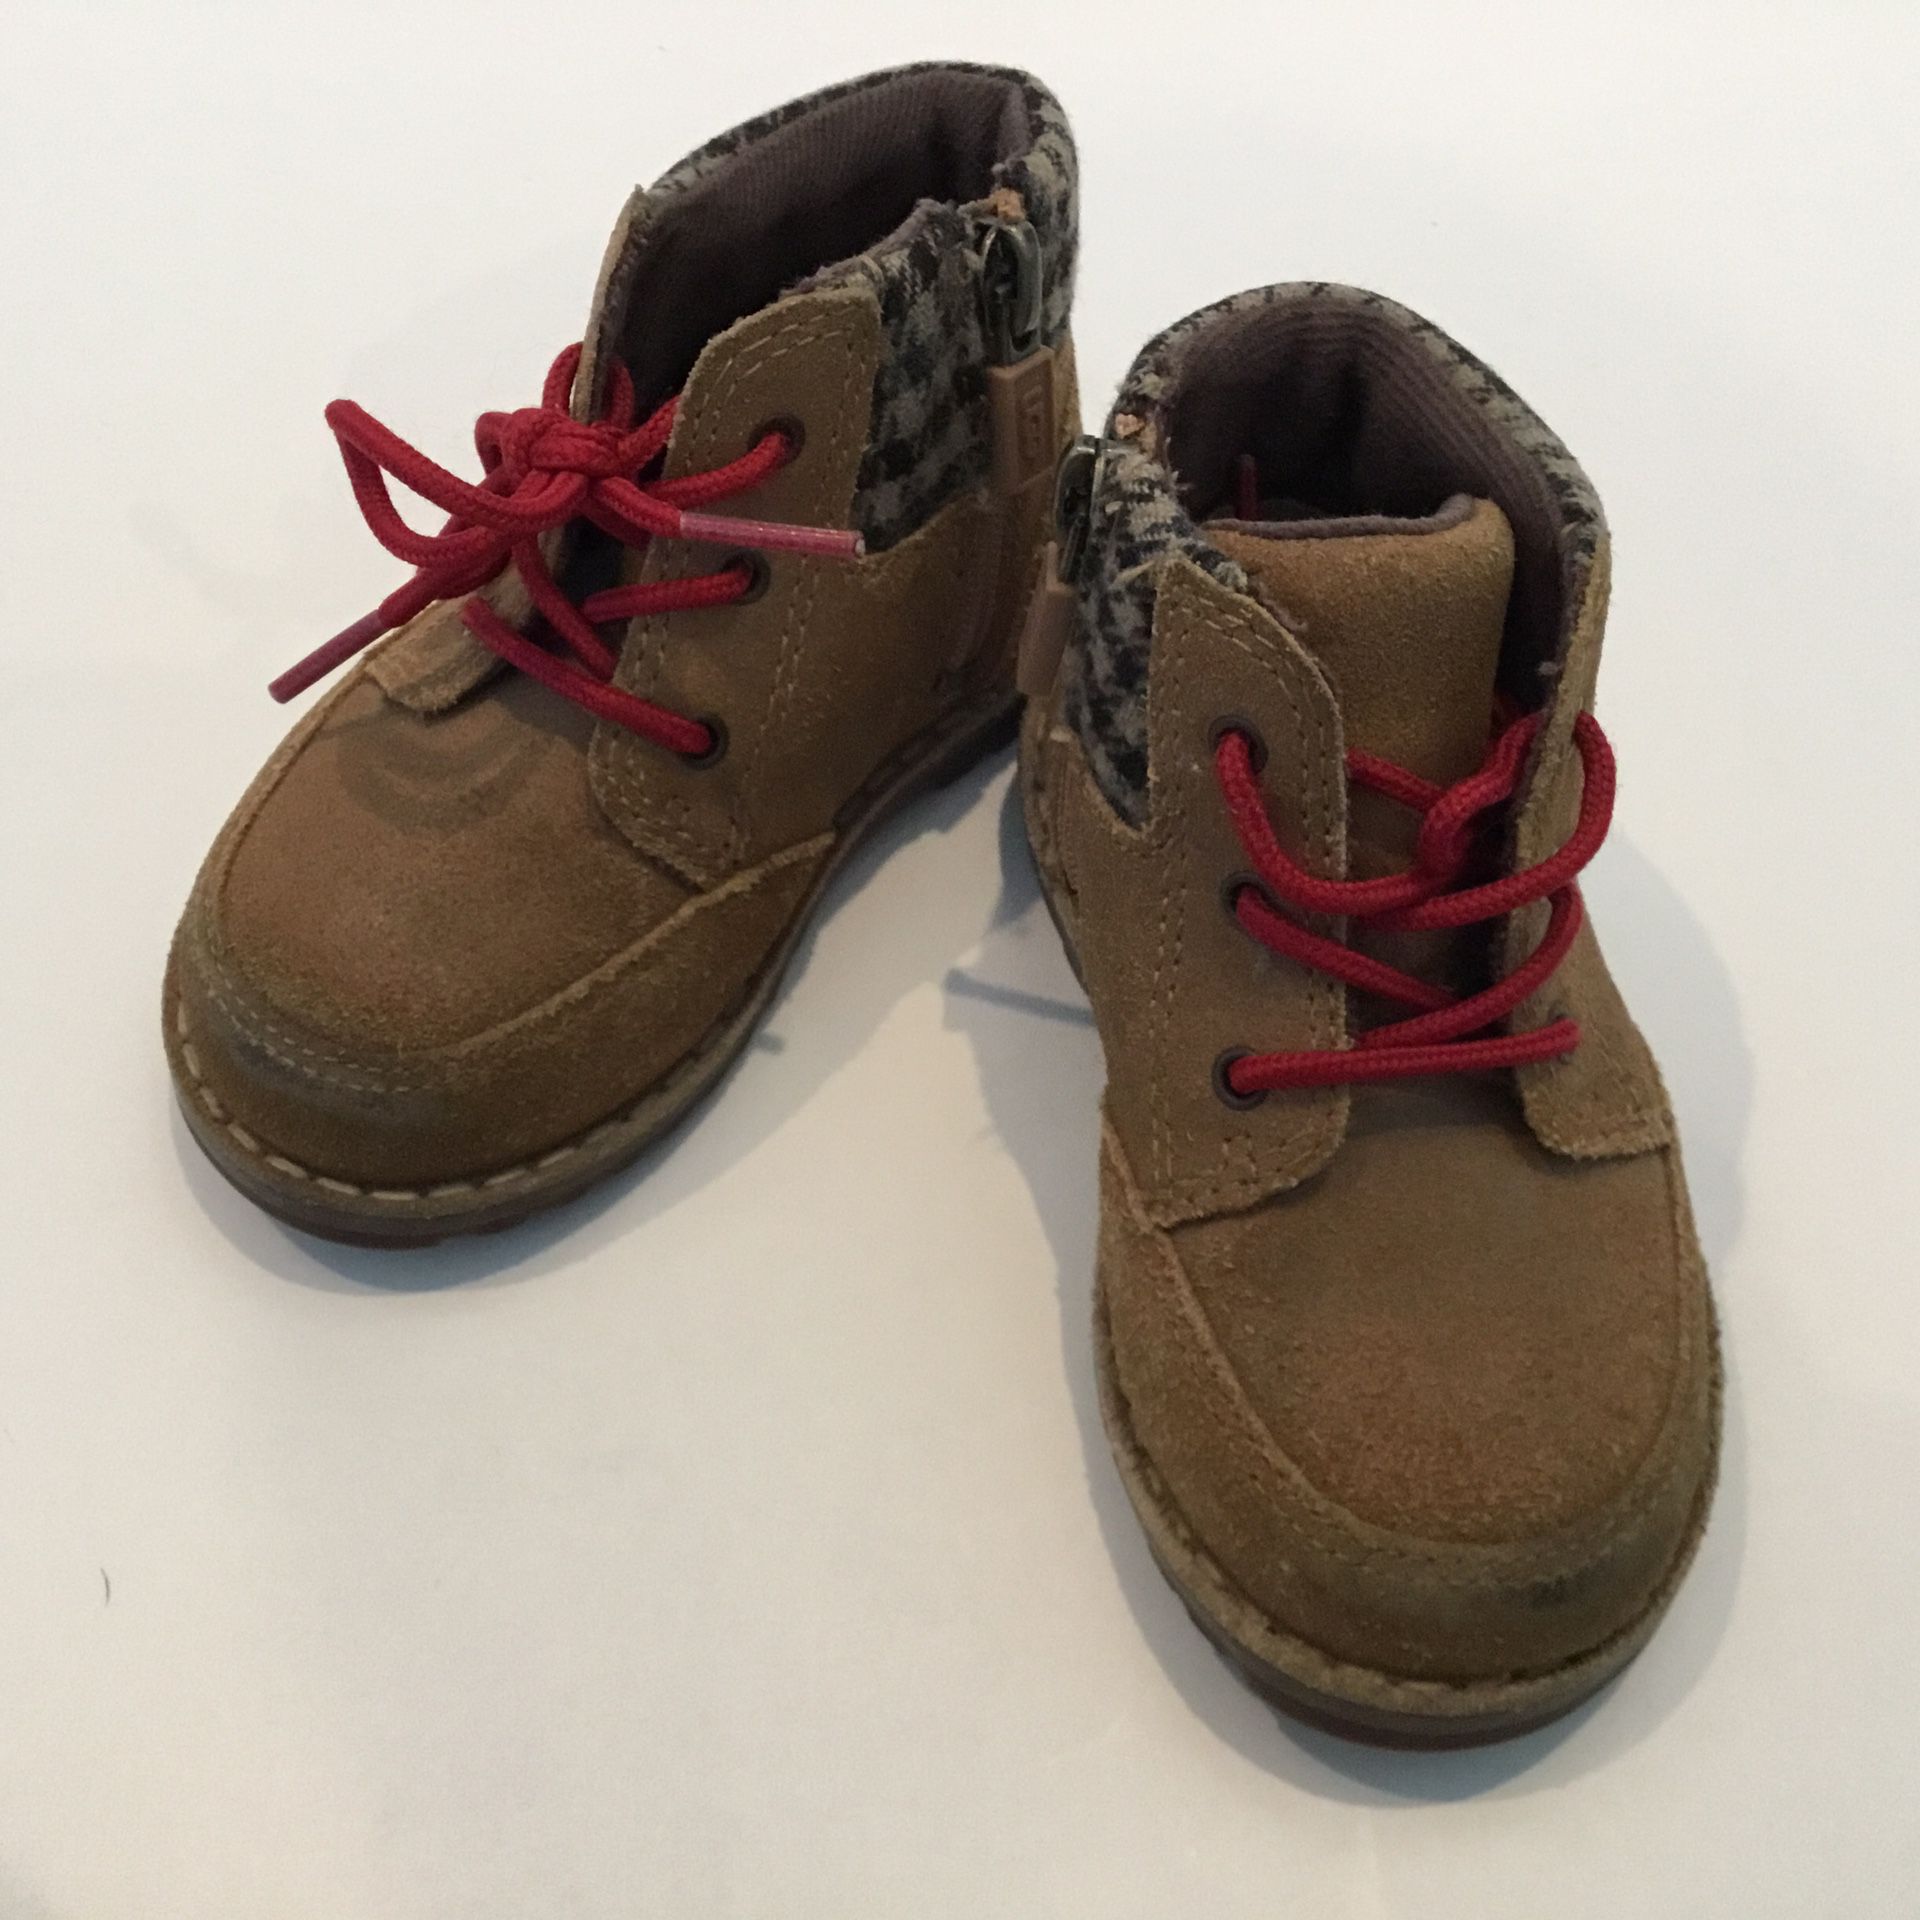 Ugg Toddler Boots Size 6 Brown Leather Unisex